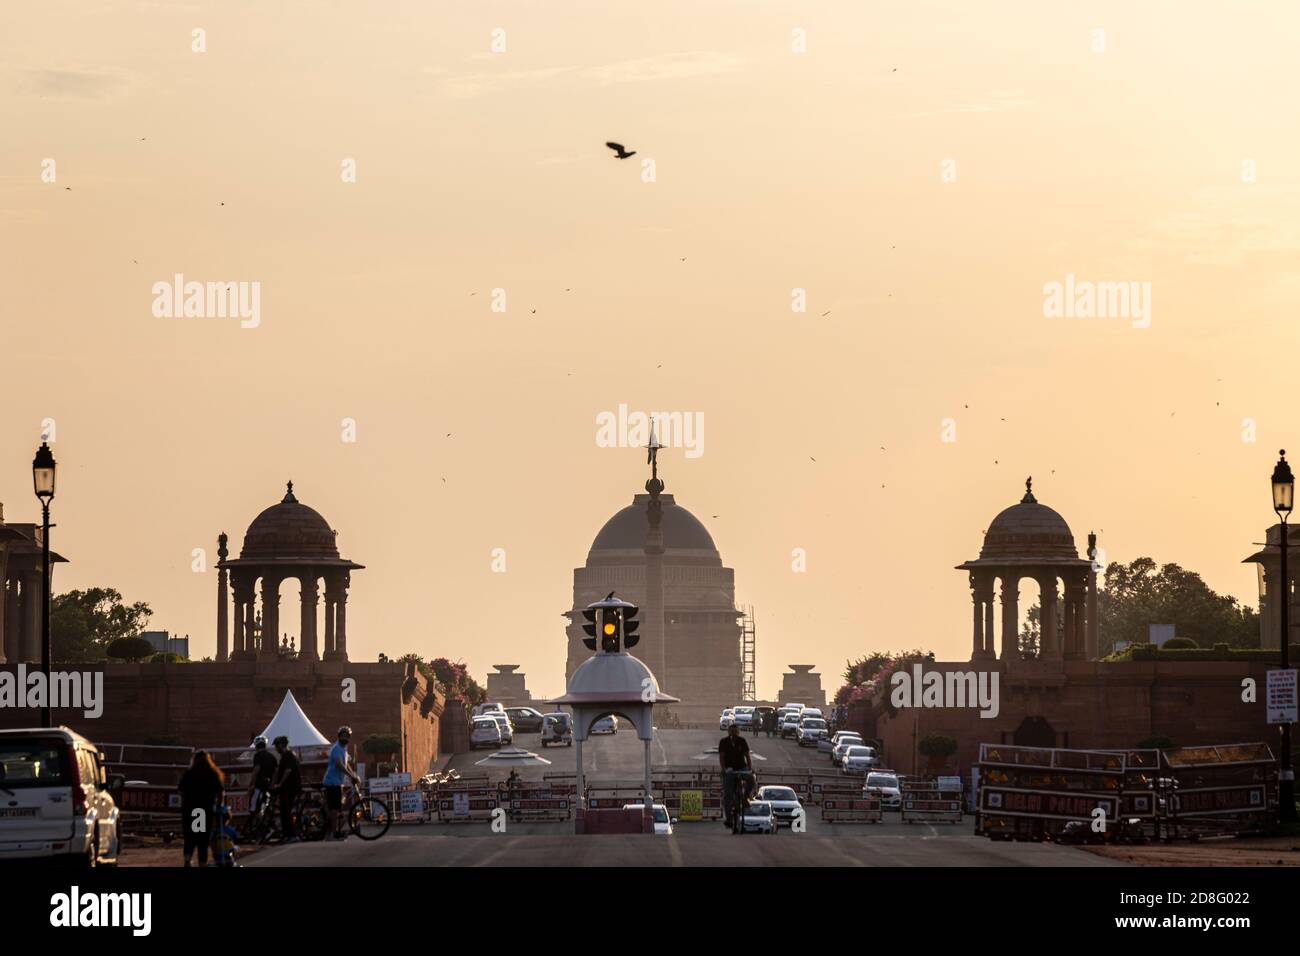 iew of the Rashtrapati Bhavan and administrative buildings in central Delhi in the backdrop of a sunset. Stock Photo